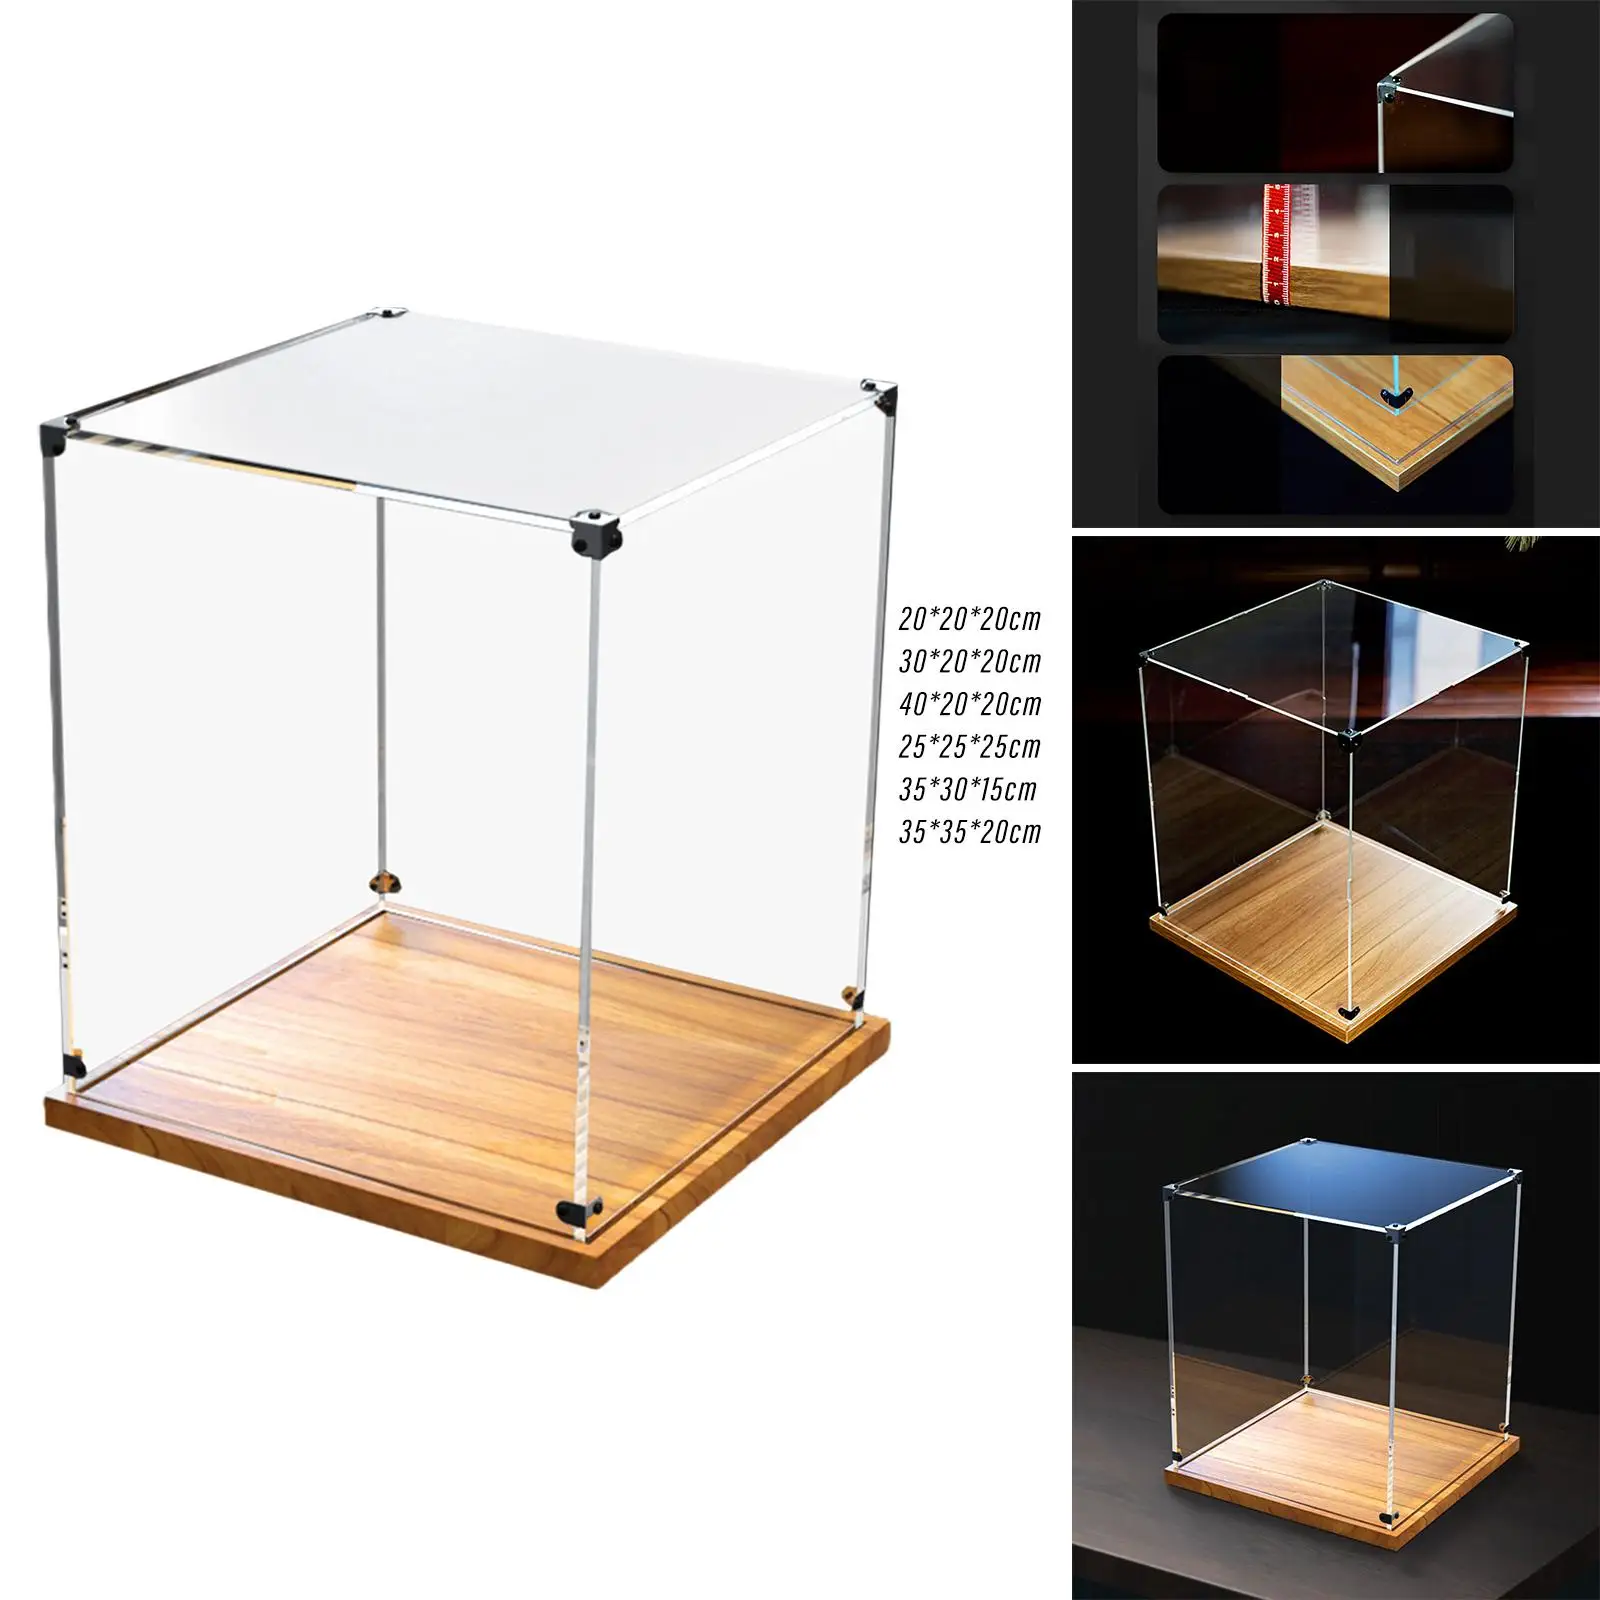 Transparent Display Box Decorative with Wooden Base Practical Stable Storage Organizer for Miniature Figurines Model Living Room